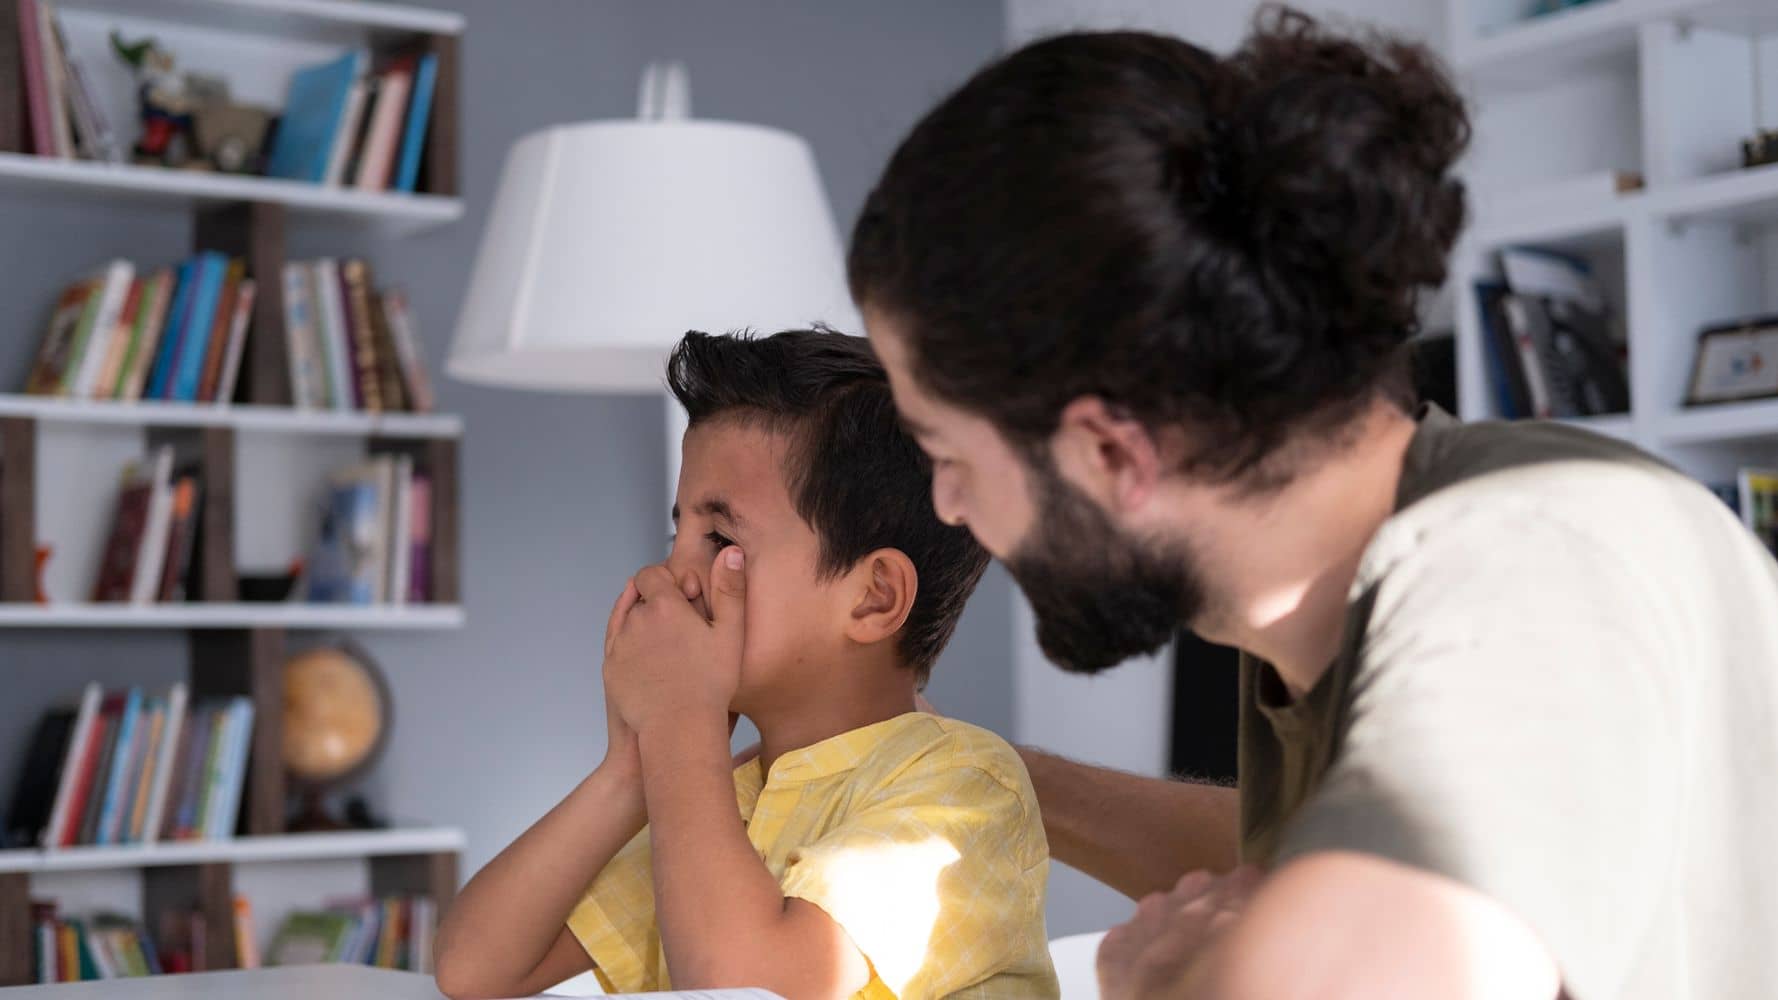 6 Psychologically Damaging Things Parents Say To Their Kids Without Realizing It